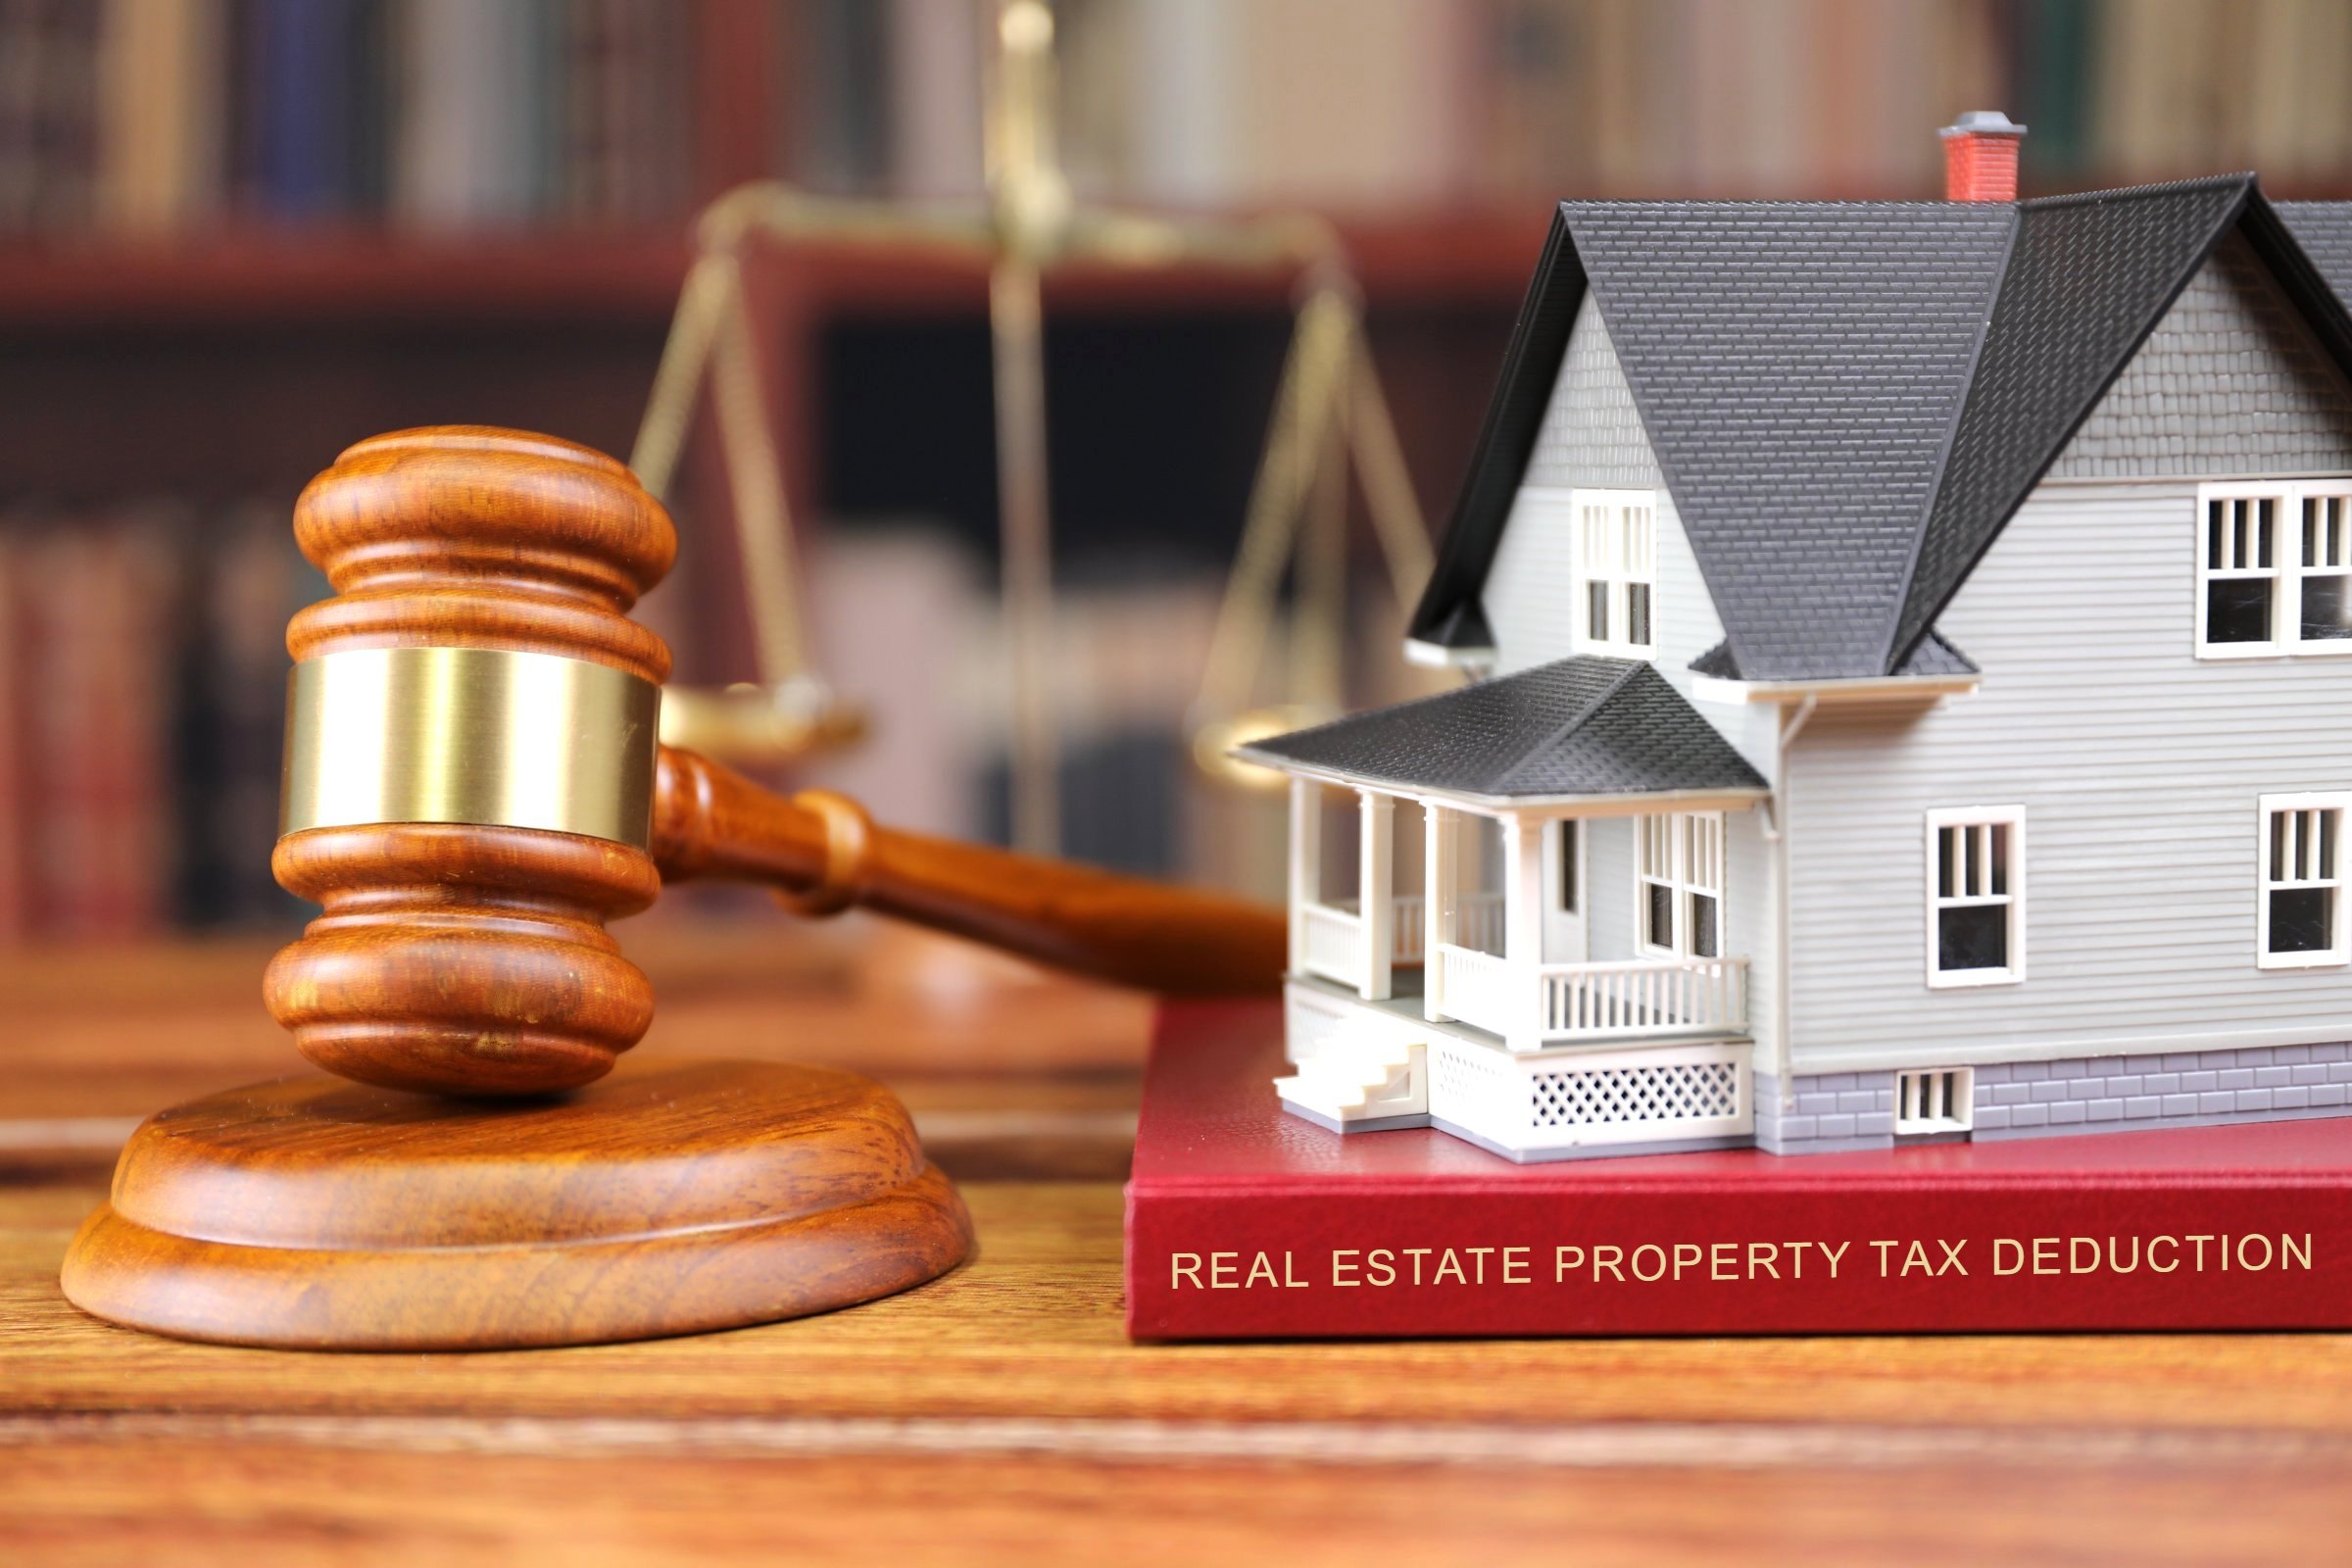 Real Estate Property Tax Deduction